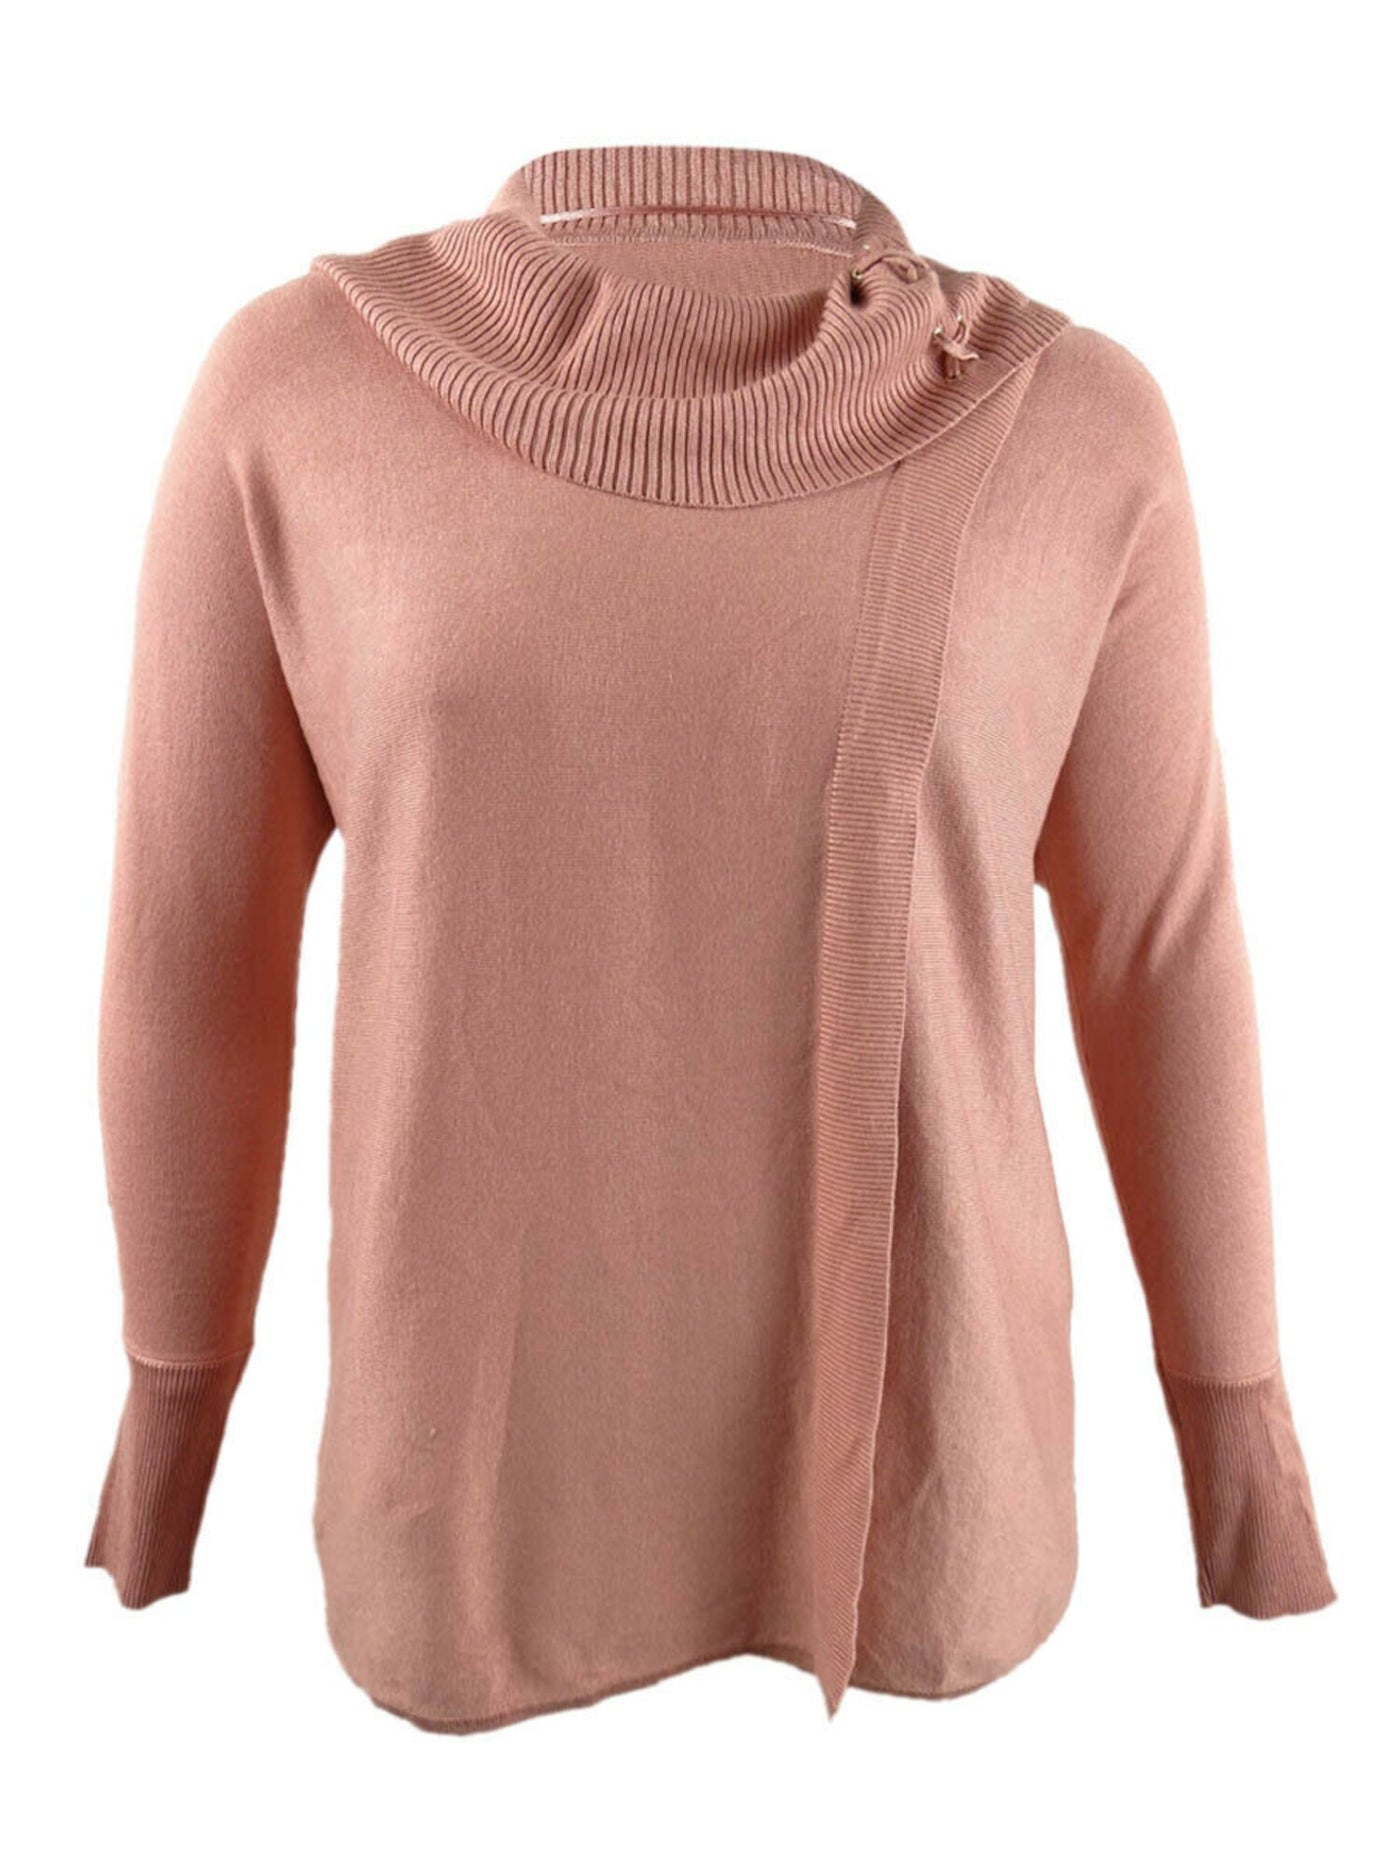 JM COLLECTION Womens Pink Long Sleeve Cowl Neck Wrap Sweater M